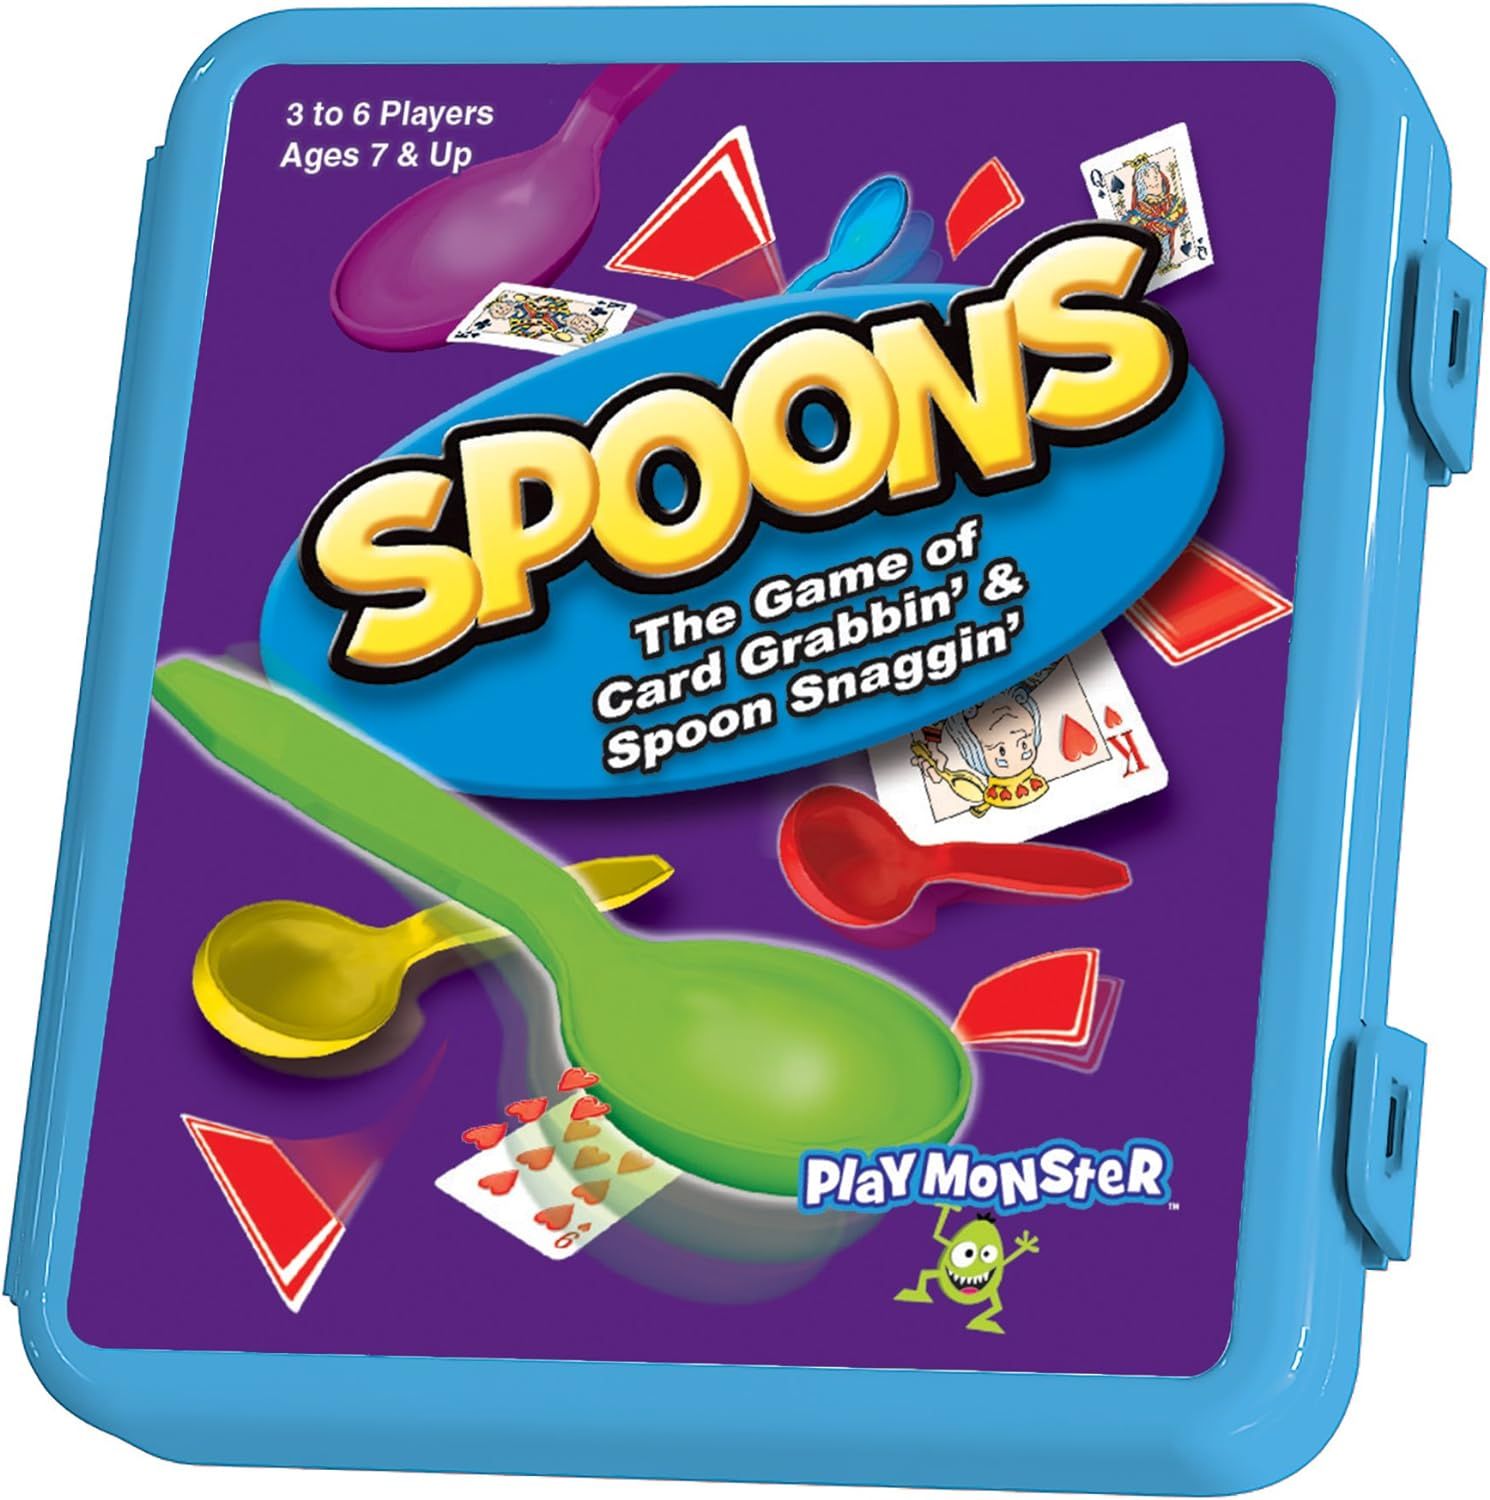 PlayMonster Spoons - The Game of Card Grabbin' & Spoon Snaggin' | Amazon (US)